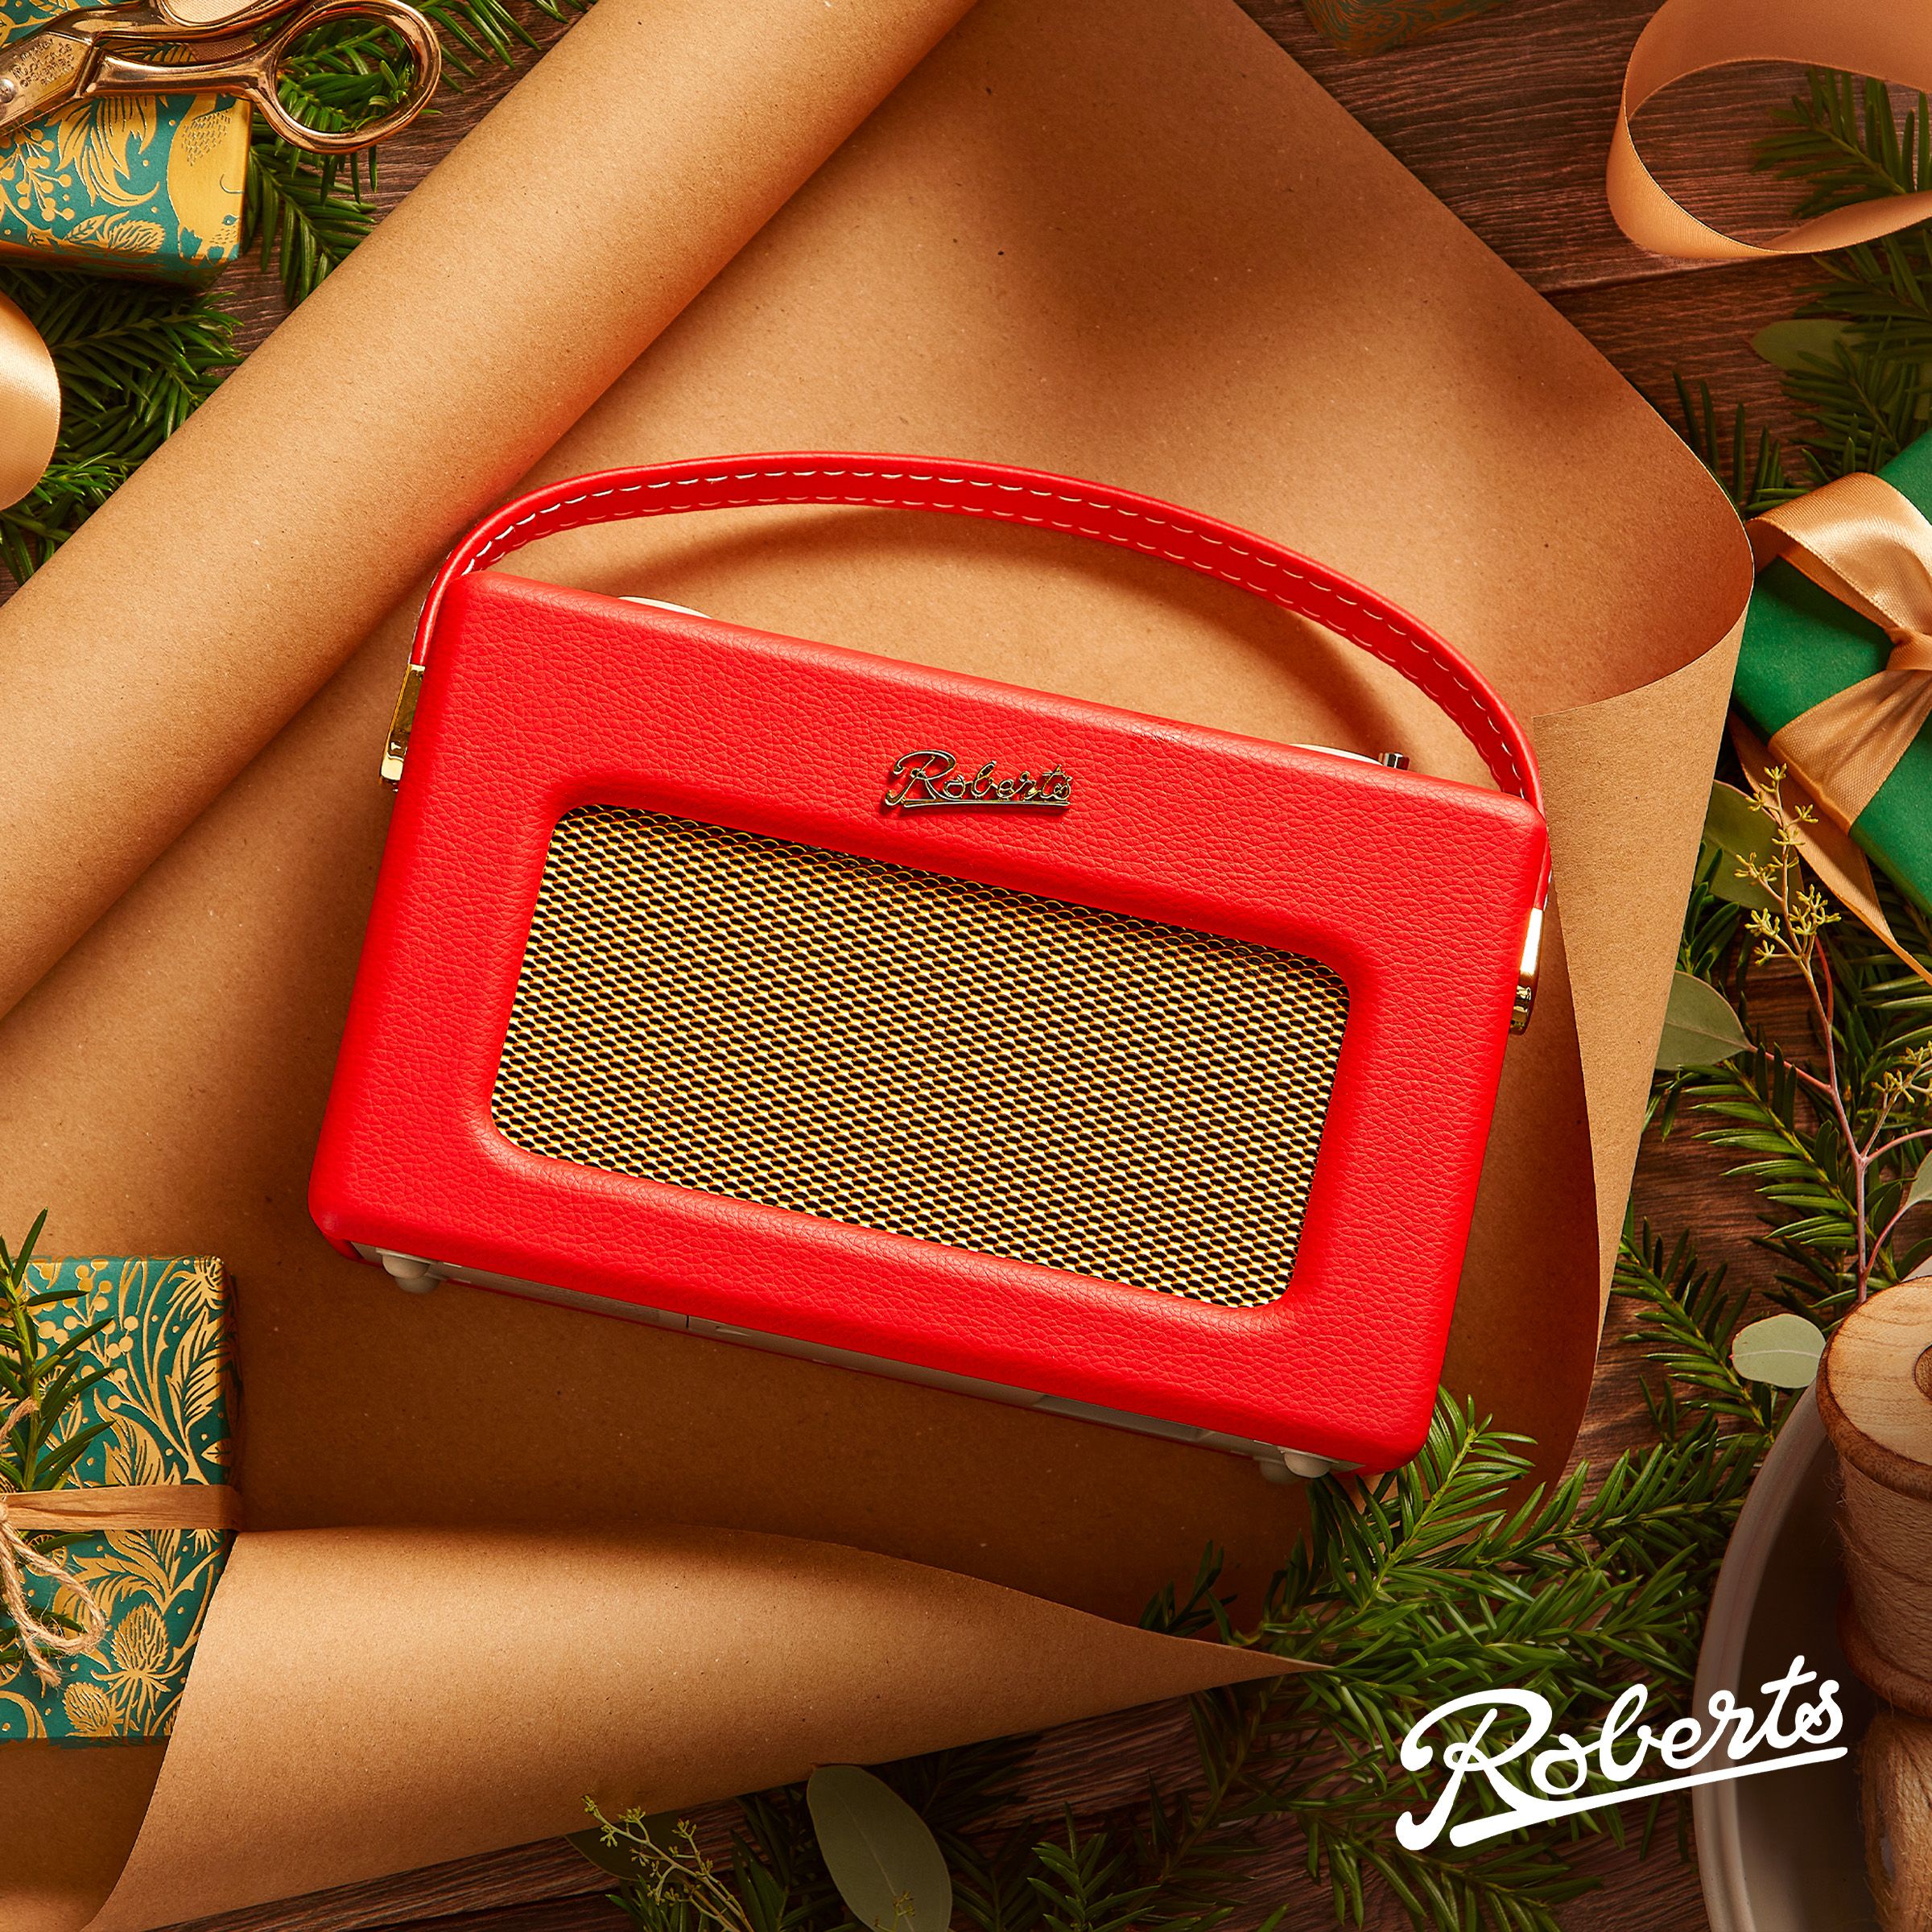 Roberts bluetooth radio sitting on gift wrapping paper